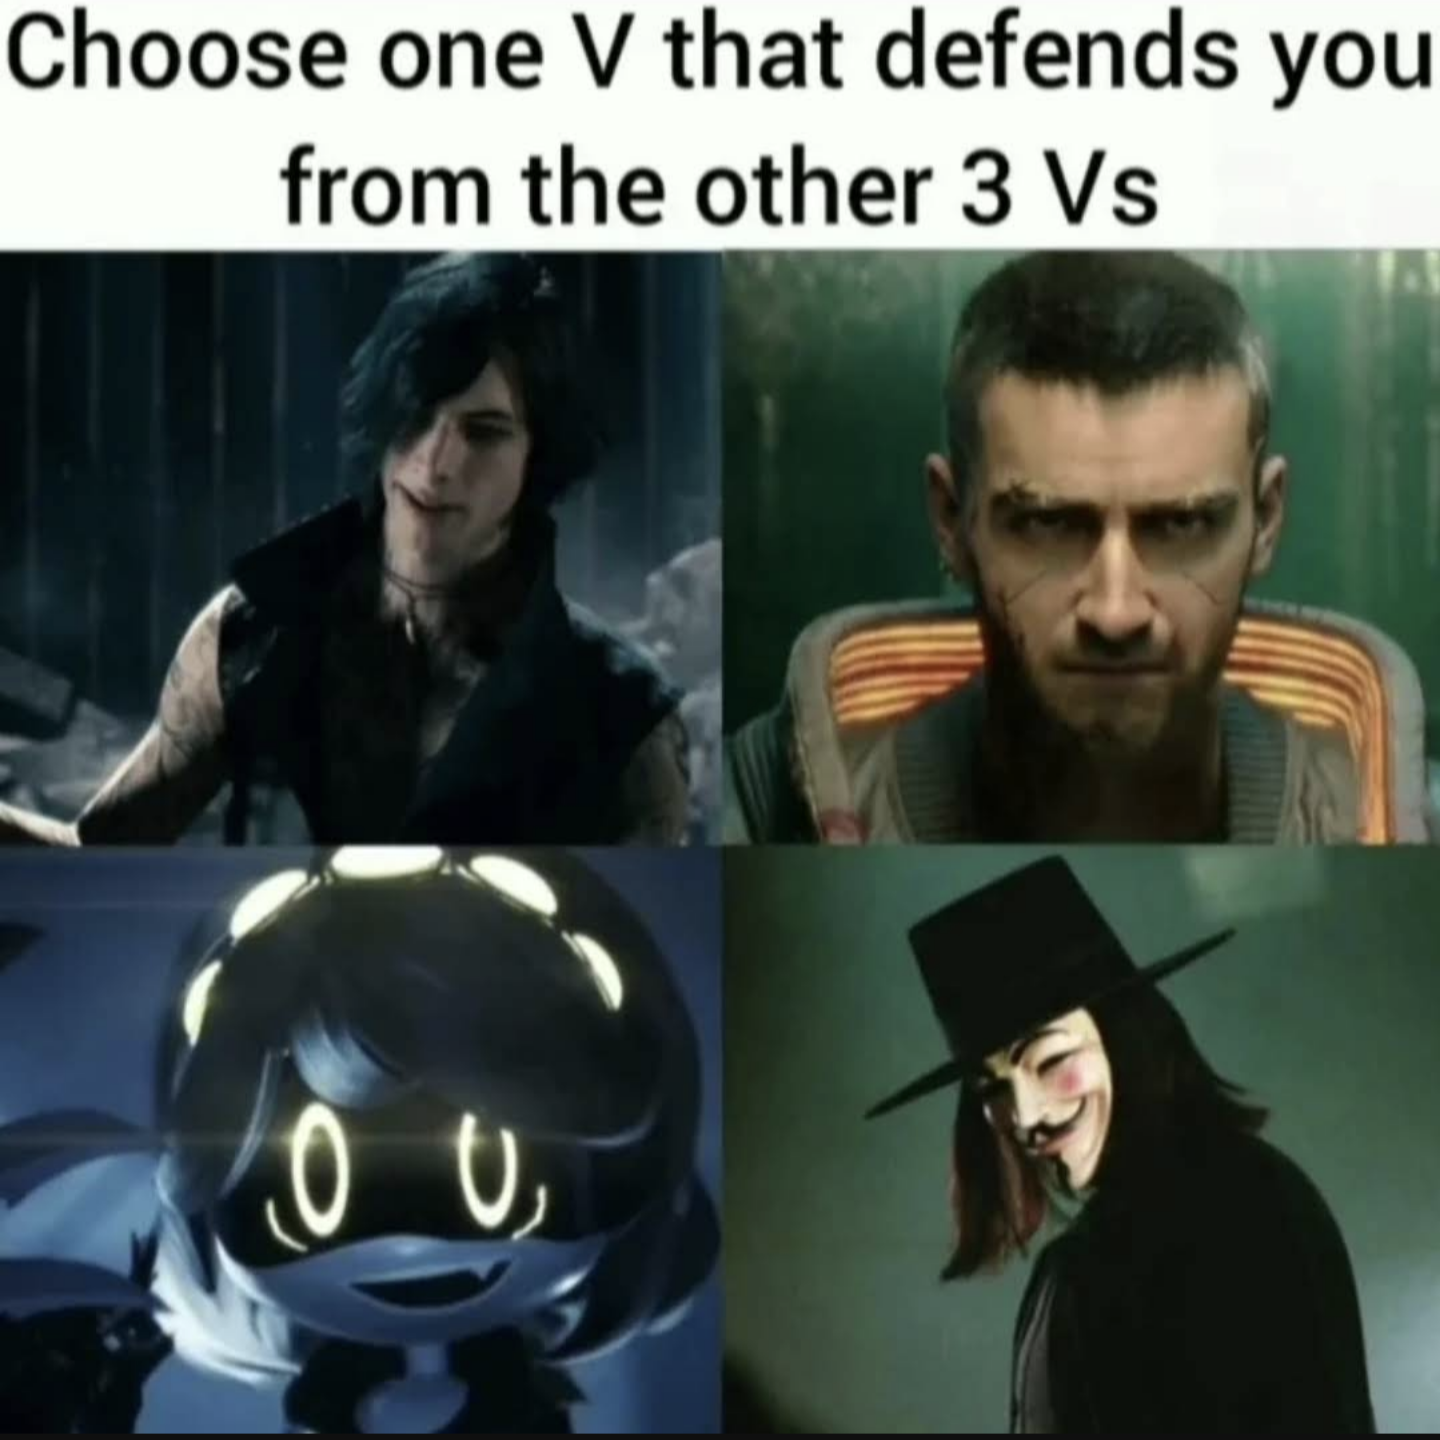 dank memes - video - Choose one V that defends you from the other 3 Vs 0 0,